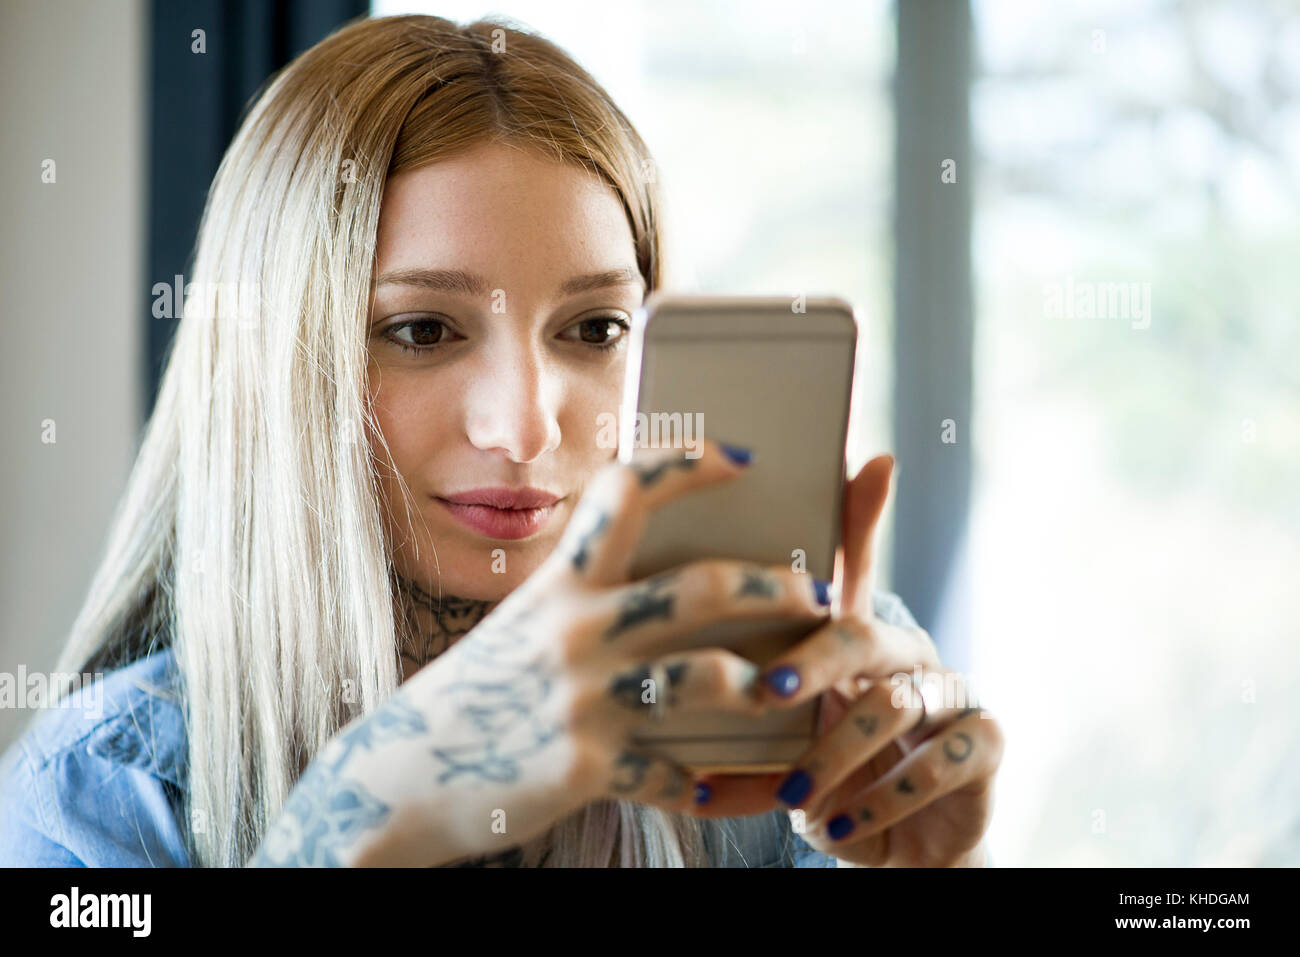 Woman looking at smartphone and smiling Banque D'Images